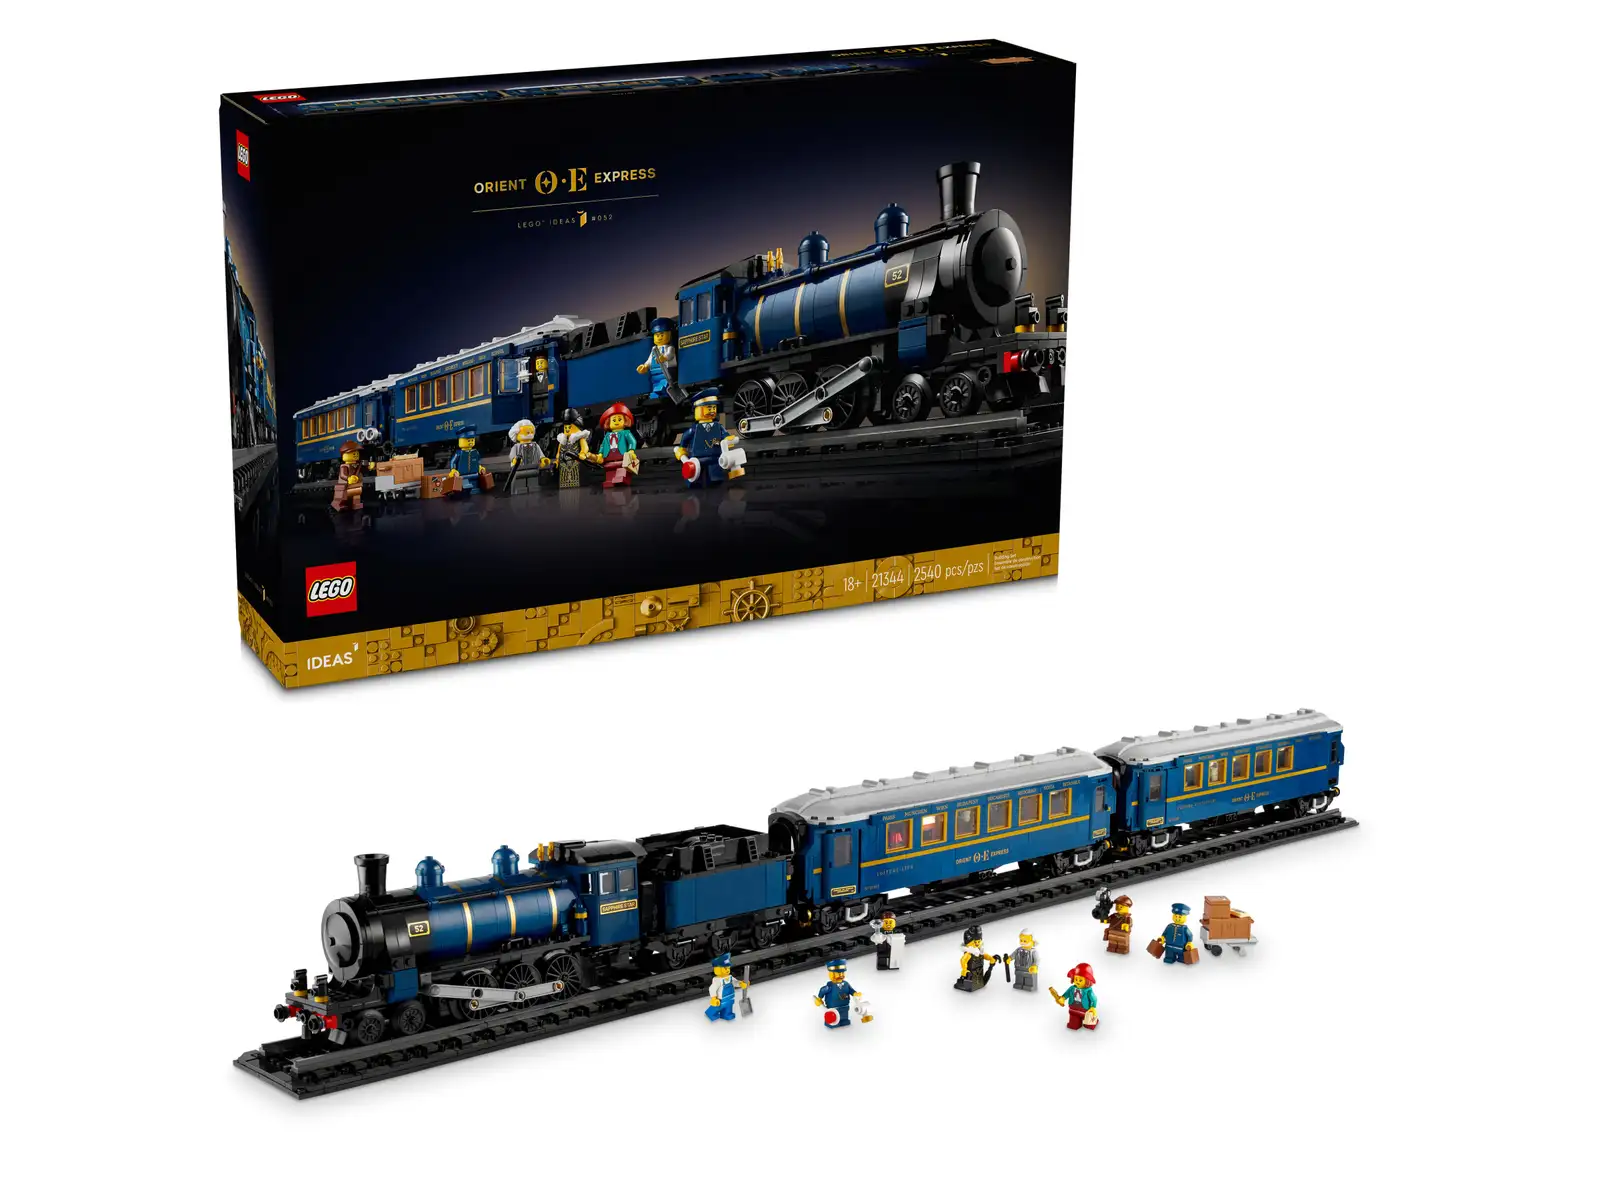 Hark back to the golden age of train travel as you build this stunning LEGO® Ideas display model (21344) of the Orient Express. An ideal gift for lovers of trains, travel and history, it features brick-built versions of the locomotive, tender, dining-car and sleeping-car, plus train tracks. Removable roofs allow easy viewing of the many authentic interior details of the dining-car and sleeping-car, including the inlaid panels and a mirror effect above the bed in the sleeping-car’s first-class room. All aboard! There are also 8 LEGO minifigures, including a railway station manager, duchess and a film director (based on the fan designer who created this set!). Find instructions in the box and on the LEGO Builder app to guide you through every step of the immersive creative experience. Building sets for adults Welcome to your zone. LEGO Sets for Adults is a carefully curated collection of top-quality models. Whatever your passion, there is a building project waiting for you. LEGO® Ideas The Orient Express Train (21344) – Embark on a creative journey to capture the vintage glamour and rich history of the Orient Express steam train in a detailed, buildable display model Includes 8 LEGO® minifigures – A duchess, conductor, train driver, waiter, railway station manager, scientist, writer and film director, plus assorted accessories and a buildable baggage cart Your carriage awaits – The tender, dining-car (voiture-restaurant) and sleeping-car (voiture-lits), each with removable roofs to view the interiors, and the locomotive, plus train tracks Authentic details – Inlaid panels and a mirror effect above the bed in the sleeping-car’s first-class room, an OE backgammon board, exterior decoration displaying the Paris–Istanbul route, and more Gift idea for adults – Treat yourself or give this 2,540-piece Orient Express steam train building set as a birthday present or holiday gift to train enthusiasts or lovers of travel and history Build and display – This collectible train model measures over 4.5 in. (12 cm) high, 46 in. (116 cm) long and 3 in. (8 cm) wide Rich history – Includes an illustrated booklet featuring the story of the Orient Express and interviews with the set’s fan designer and LEGO® designers, plus step-by-step building instructions The LEGO® fans’ choice – This collectible building set for adults is one of a diverse range of LEGO Ideas sets, each created by a fan designer, voted for by LEGO fans and produced by the LEGO Group Premium quality – LEGO® bricks satisfy rigorous industry quality standards to ensure that they connect simply and securely Safety assurance – LEGO® components are dropped, heated, crushed, twisted and carefully analyzed to make sure that they comply with strict global safety standards